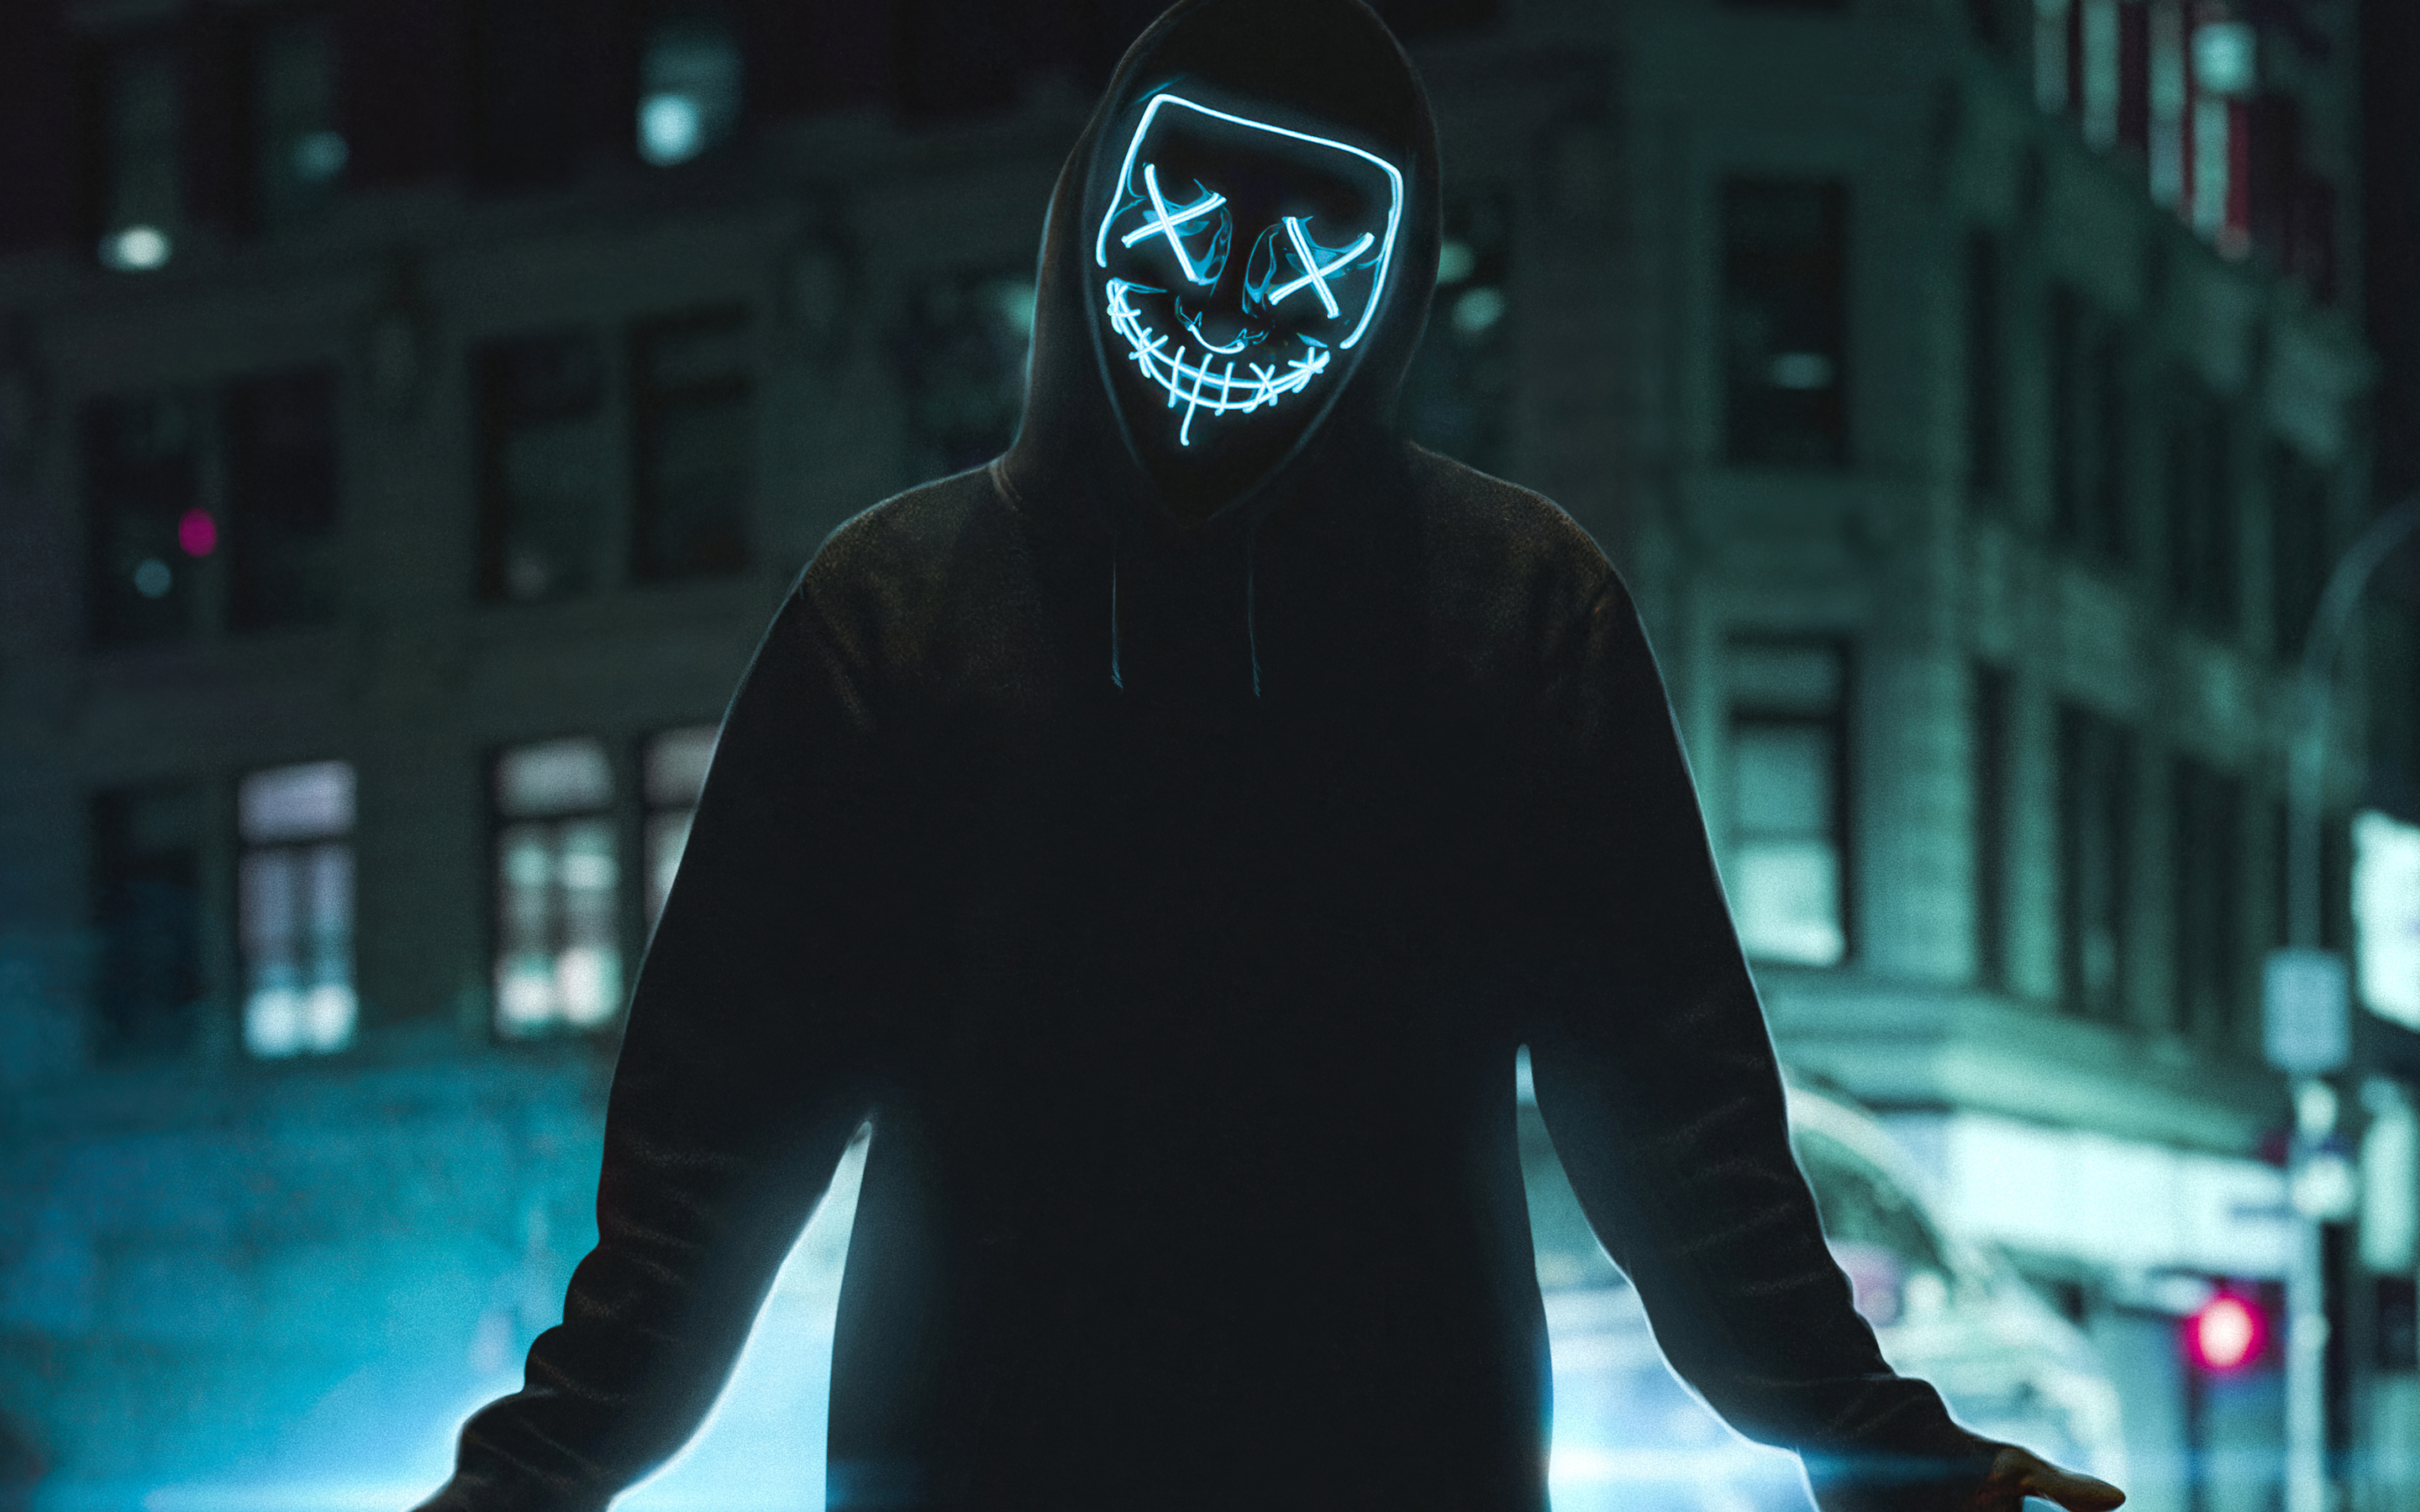 2880x1800 Neon Mask Guy Street 4k Macbook Pro Retina Hd 4k Wallpapers Images Backgrounds Photos And Pictures